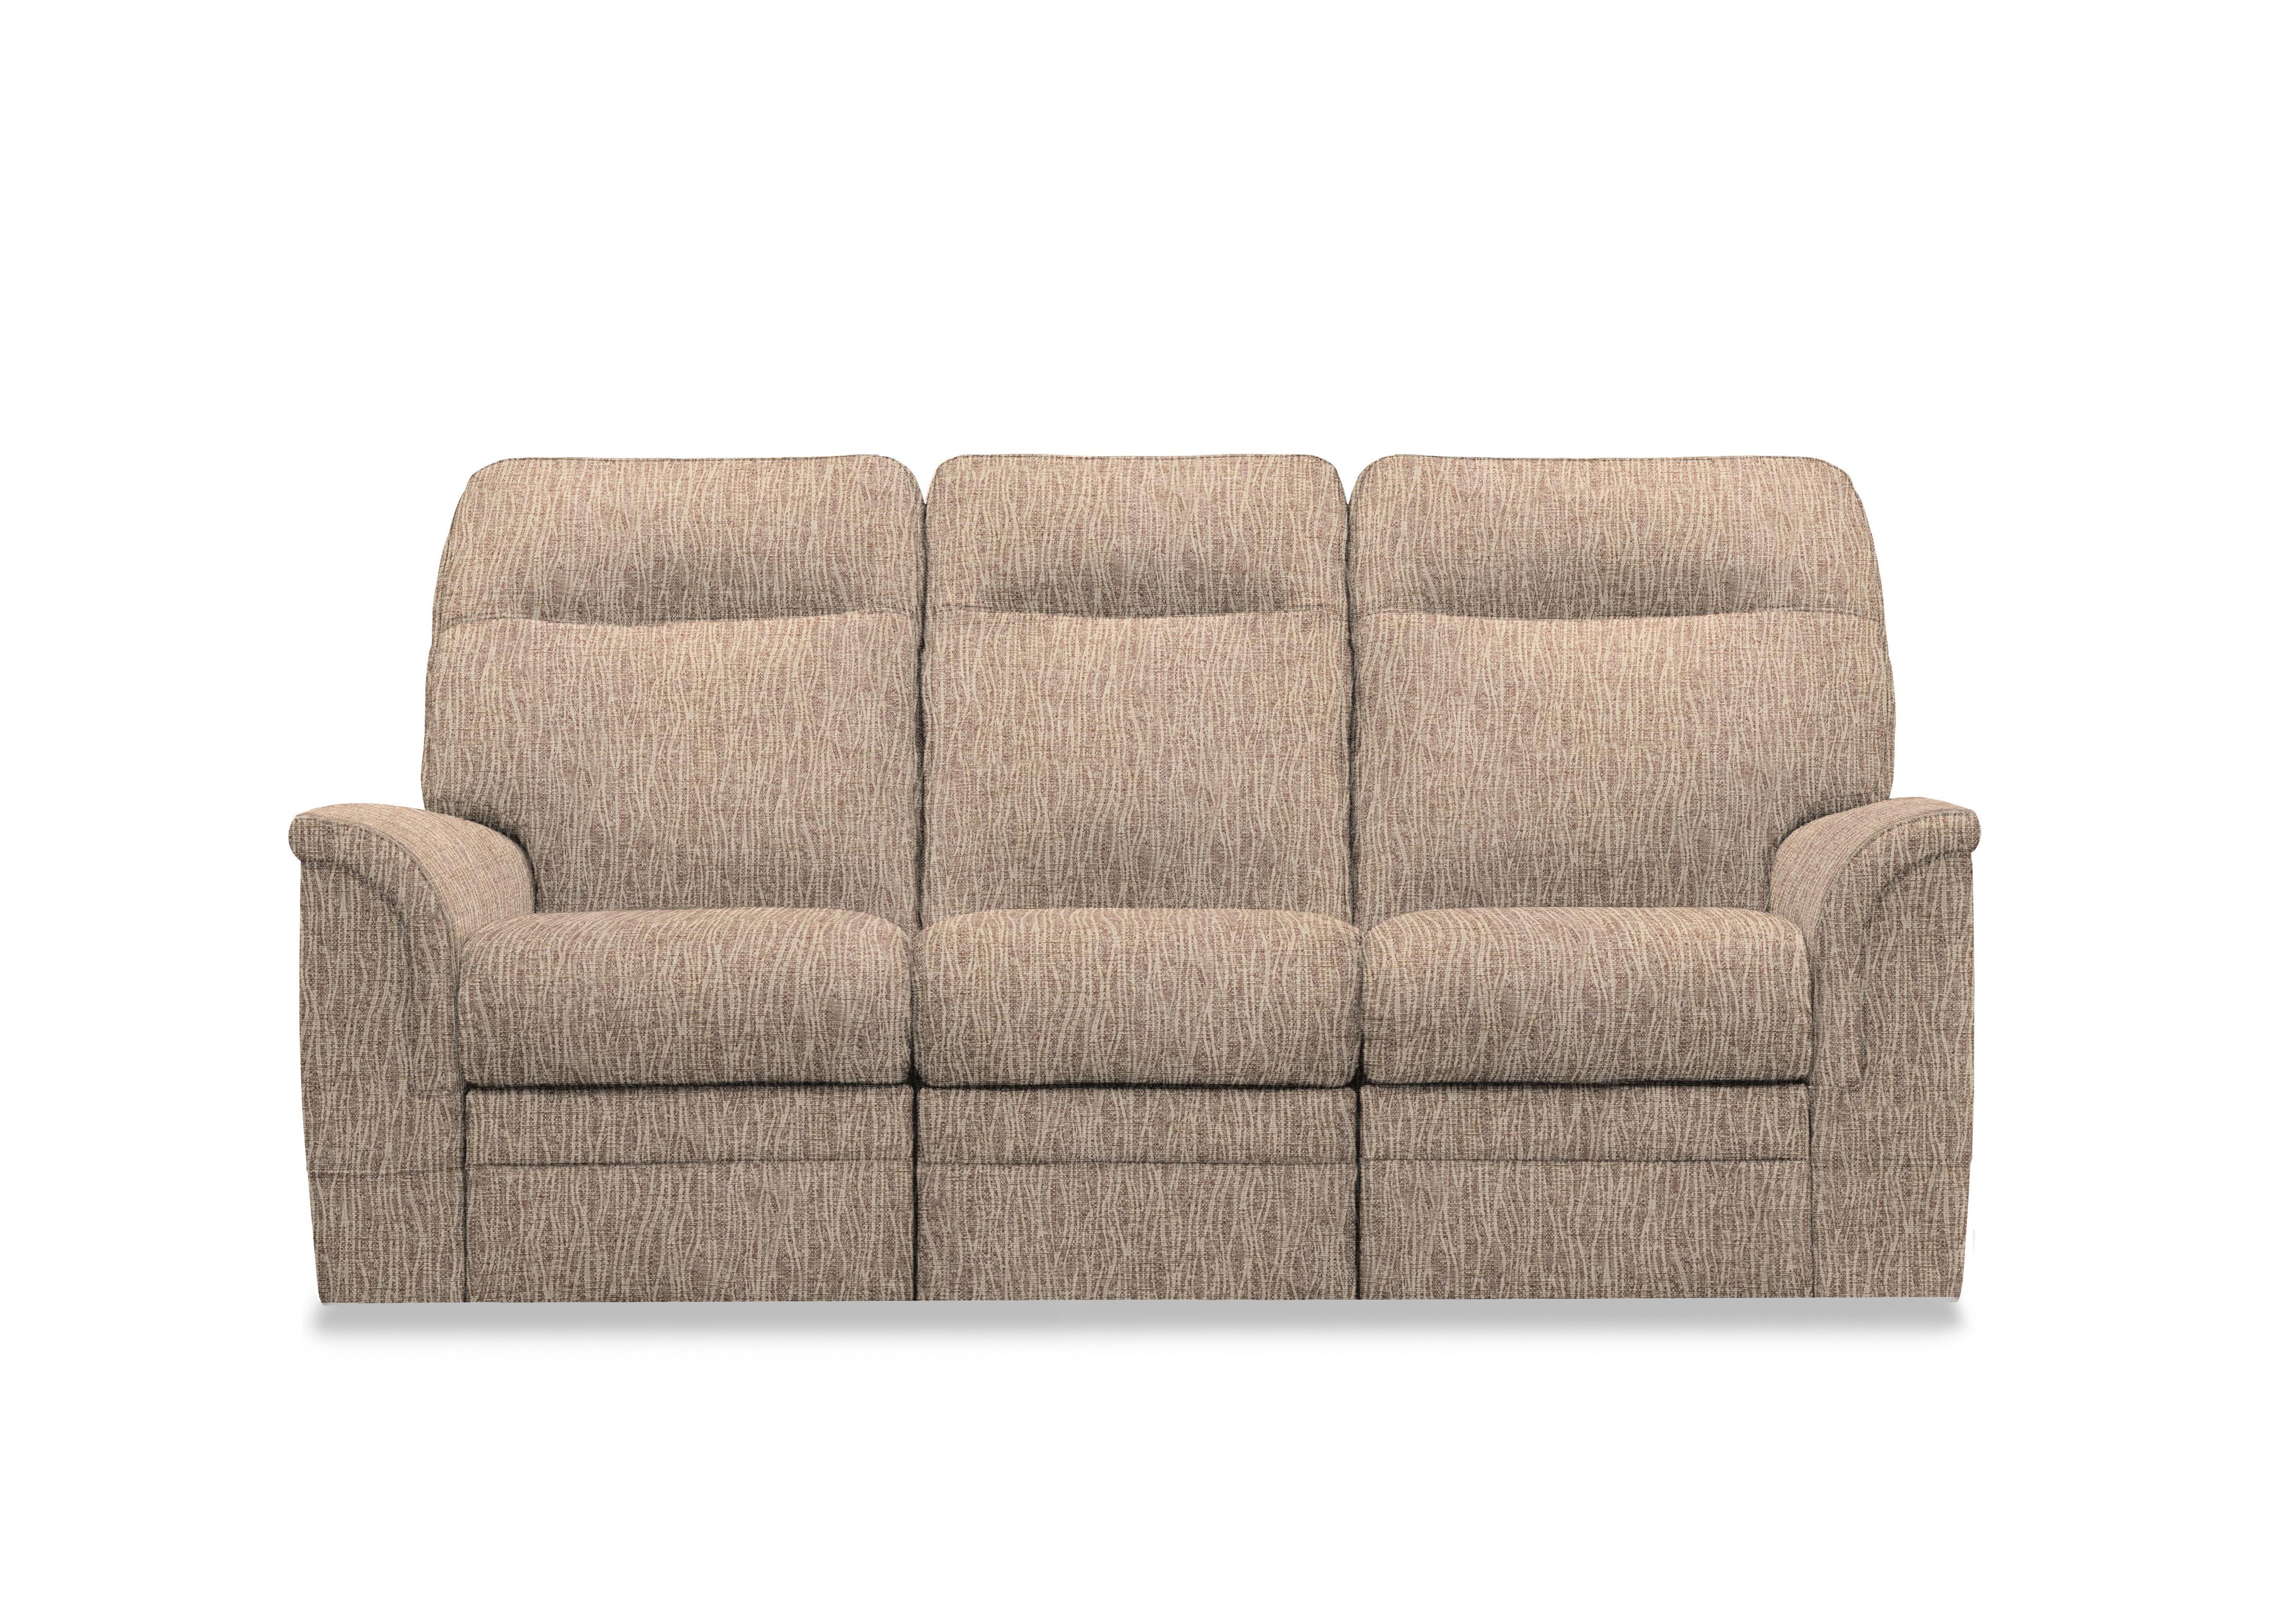 Hudson 23 Fabric 3 Seater Power Recliner Sofa with Power Headrests and Power Lumbar in Dune Sand 001482-0054 on Furniture Village